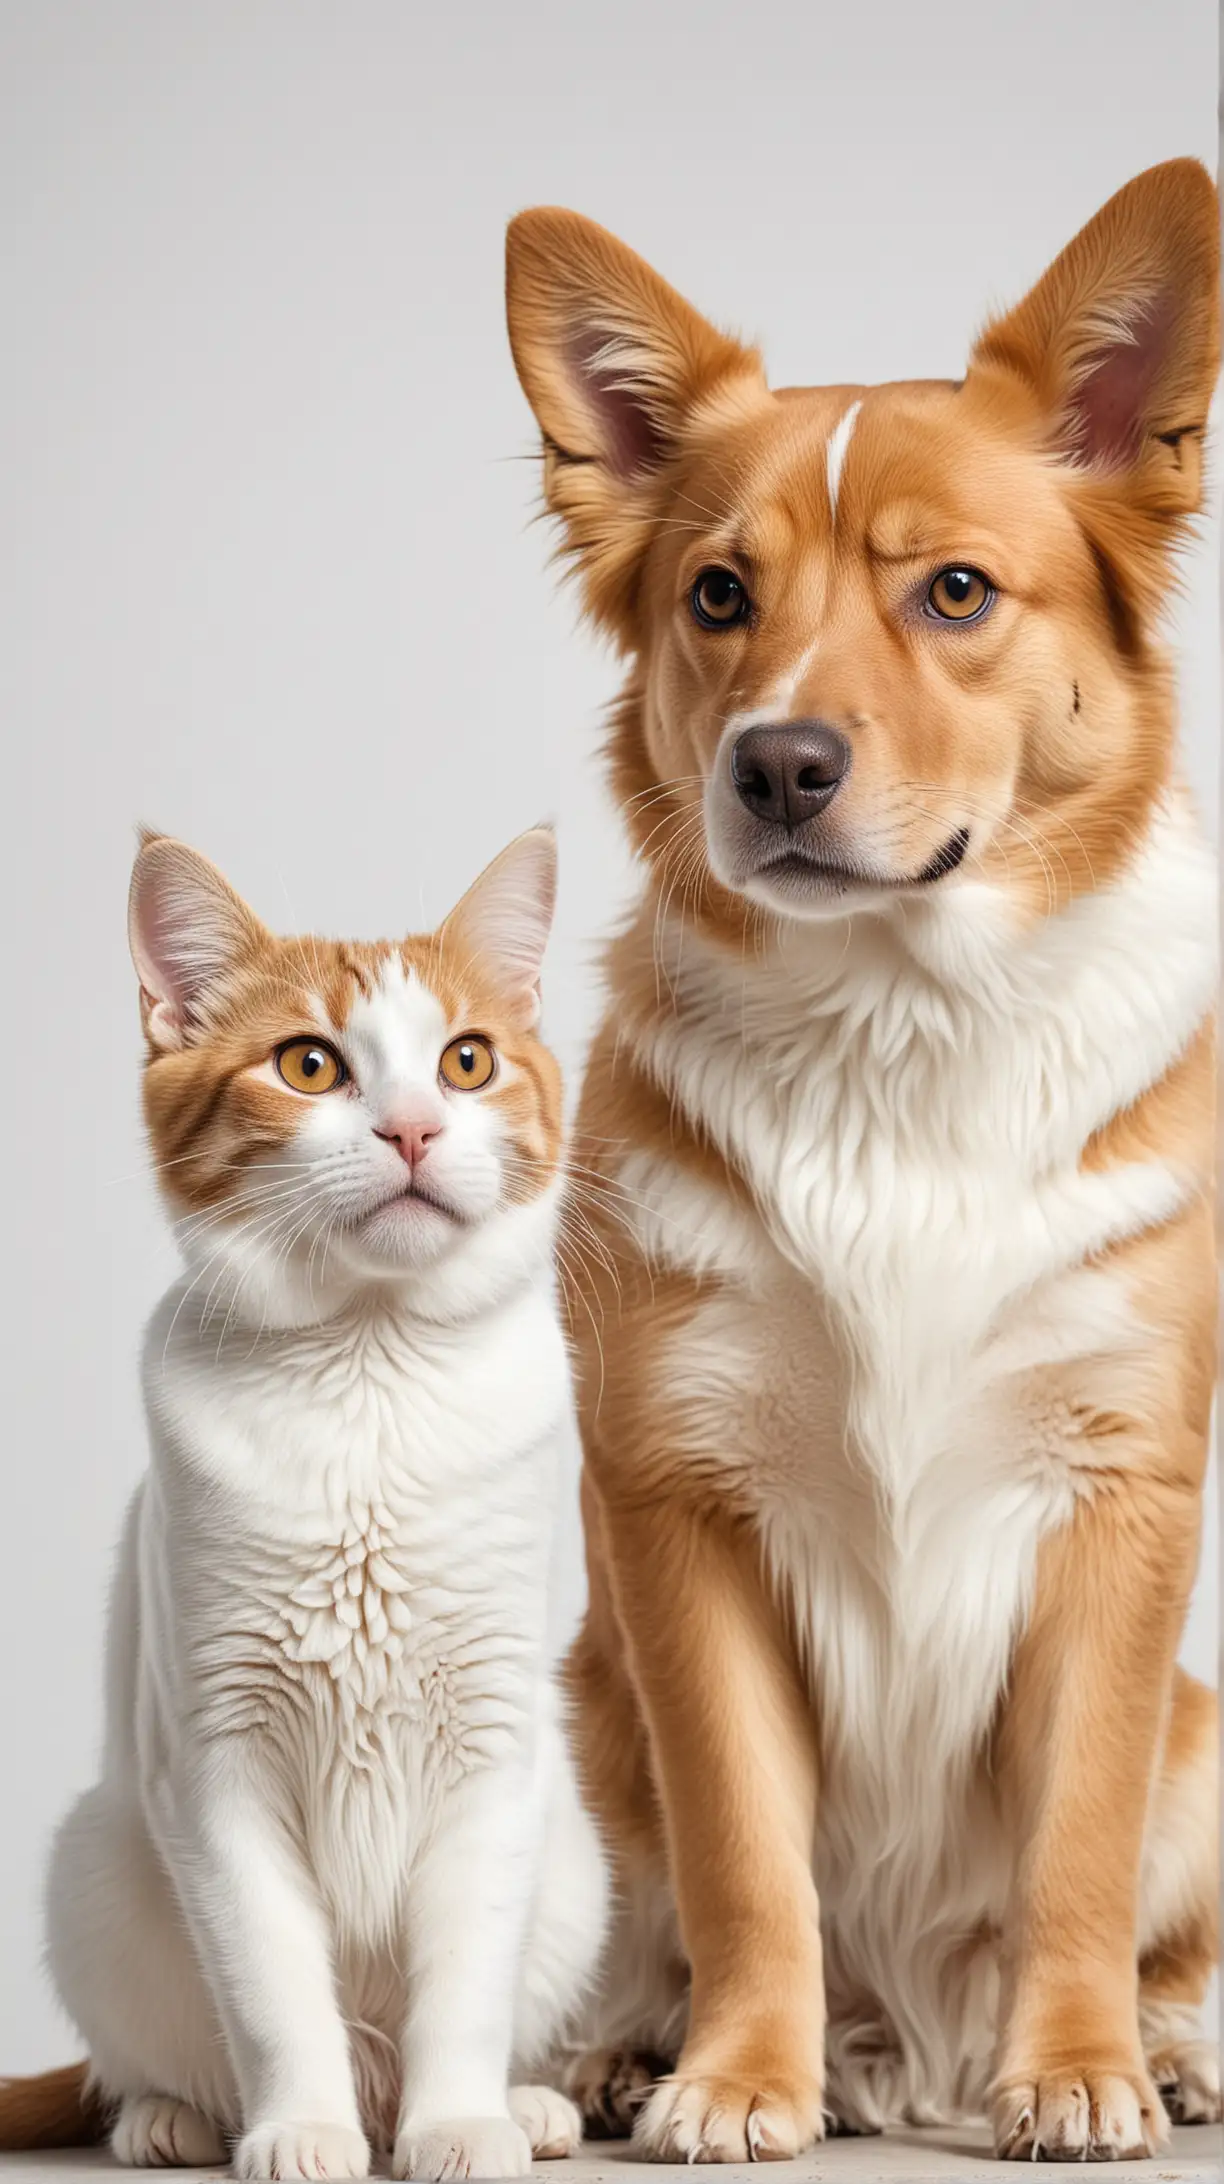 Dog and Cat Together on White Background